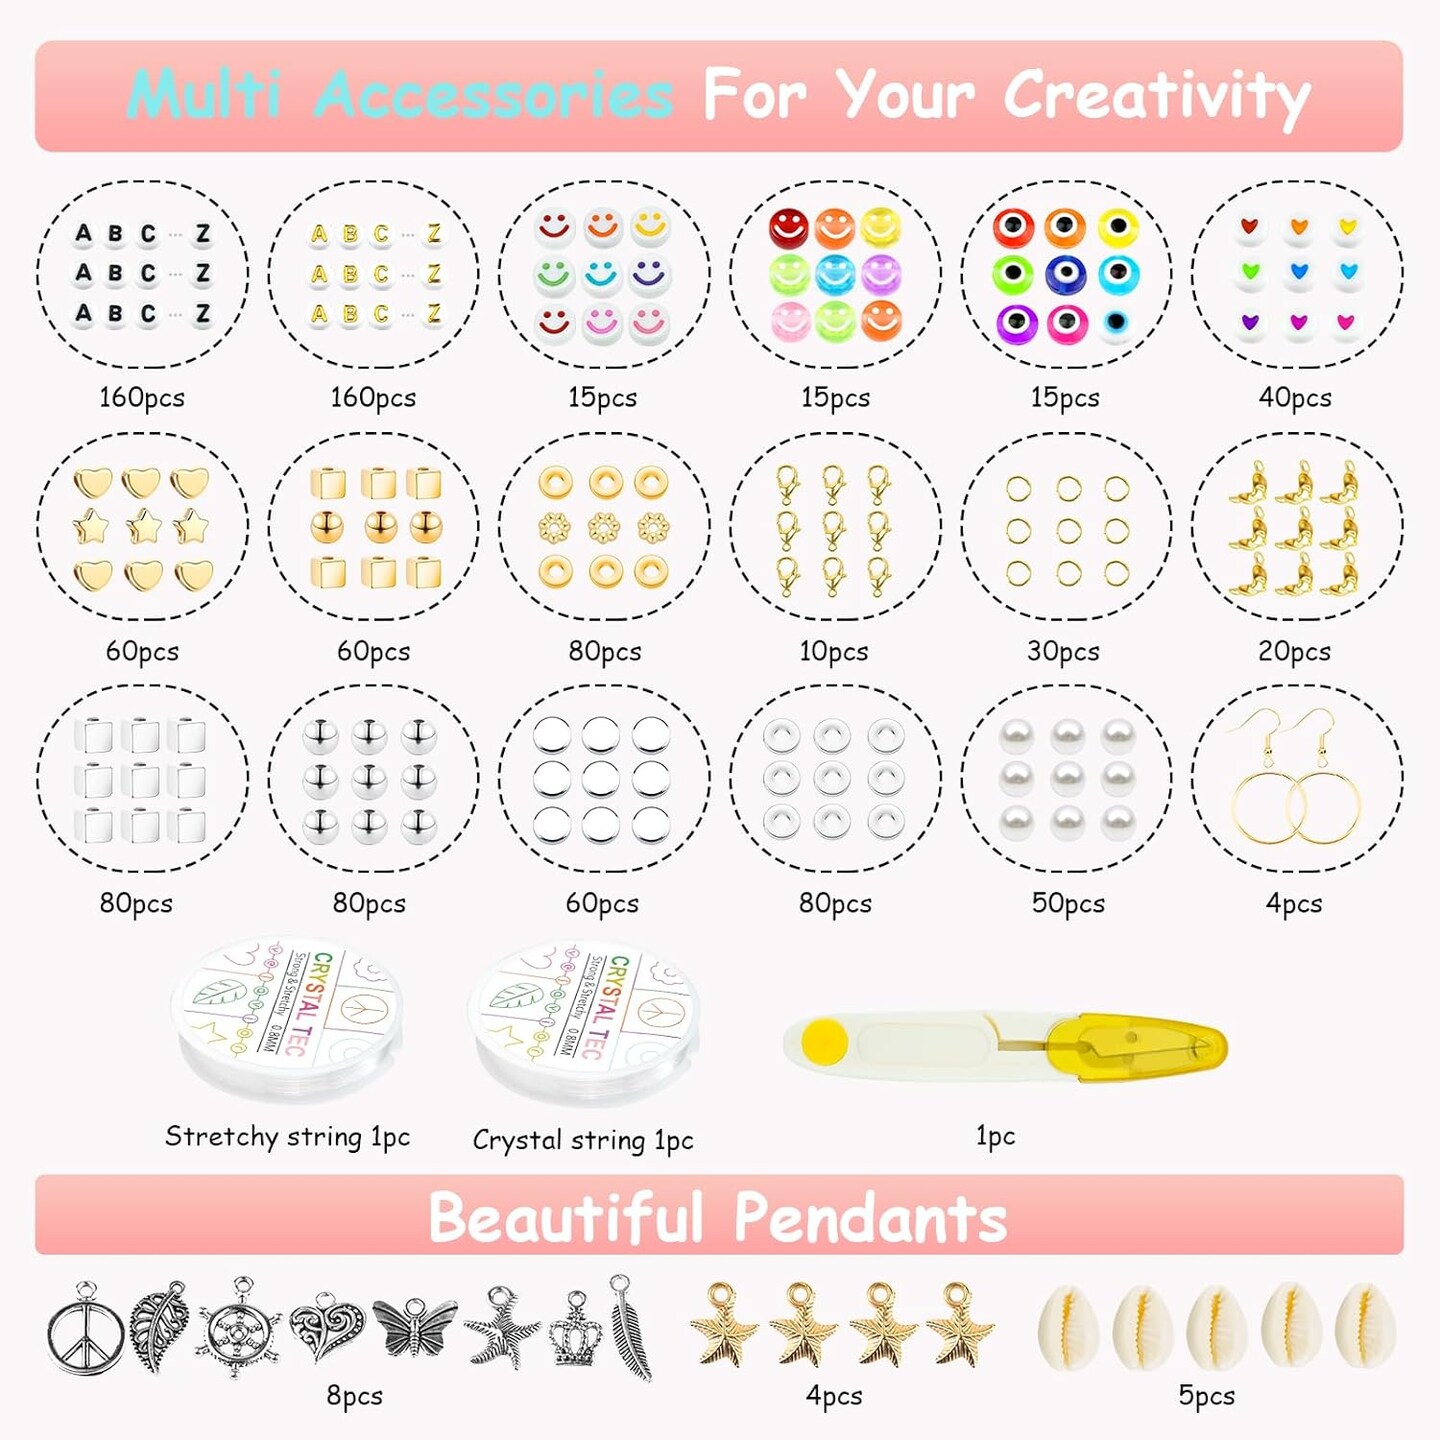 15000 Pcs Clay Beads Bracelet Making Kit, 96 Colors Polymer Heishi Beads With Letter Charms Elastic Strings For Girls Preppy Craft/Jewelry